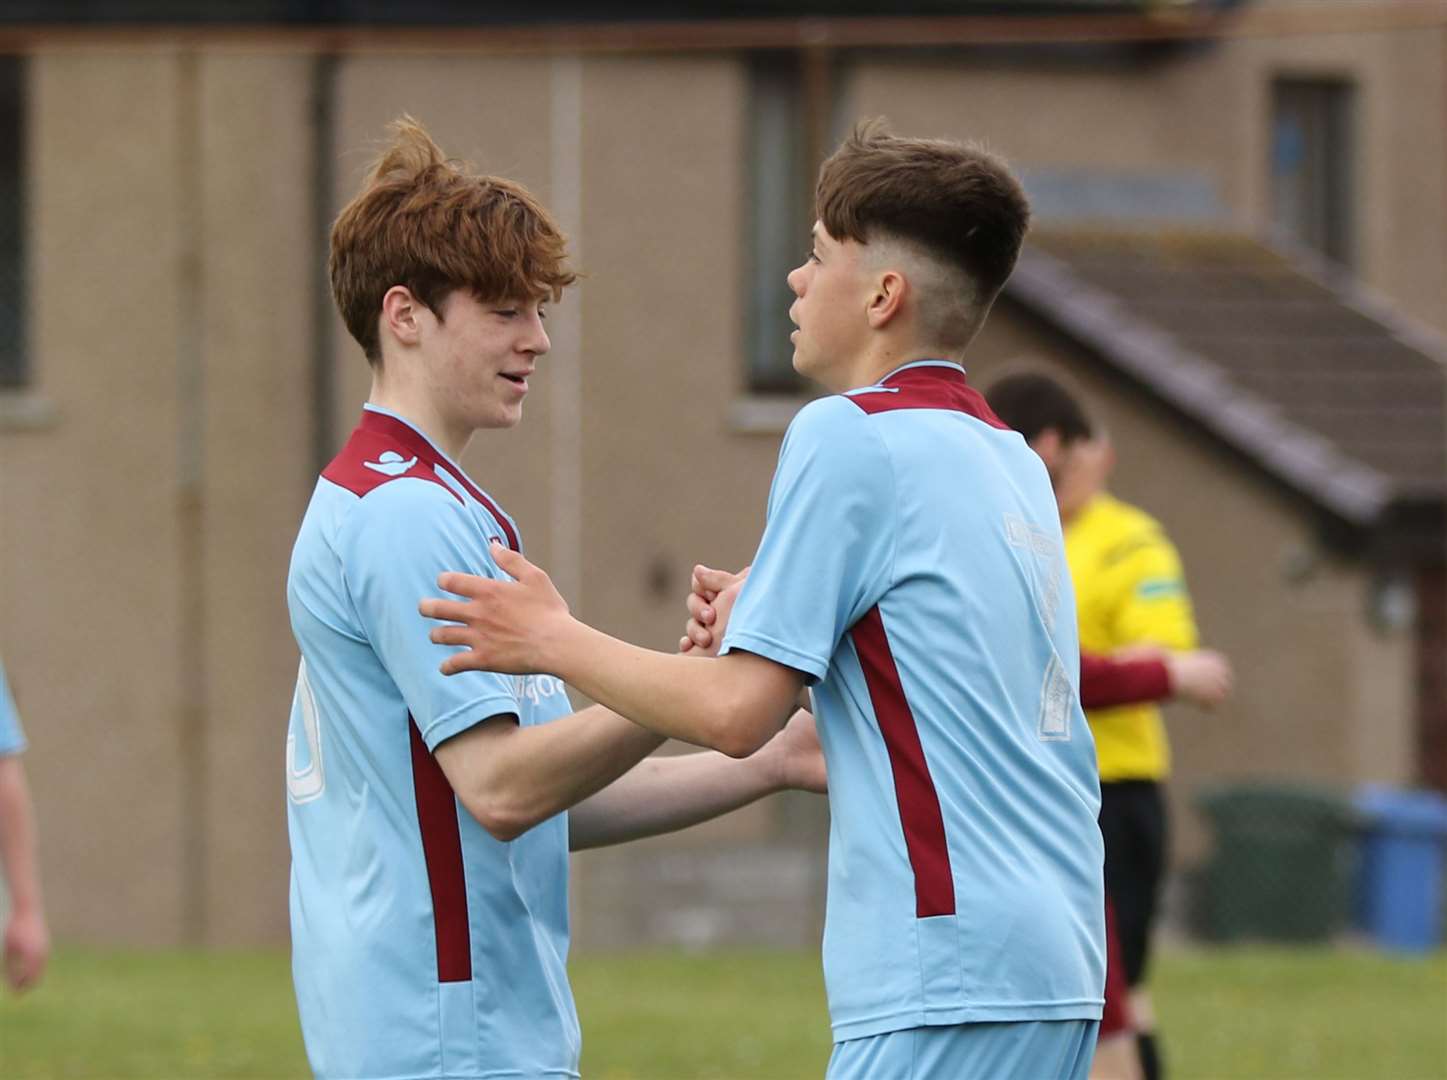 Owen Bain (right) is congratulated by Josh Sutherland after scoring Pentland United's fourth goal against Top Joe's. Picture: James Gunn